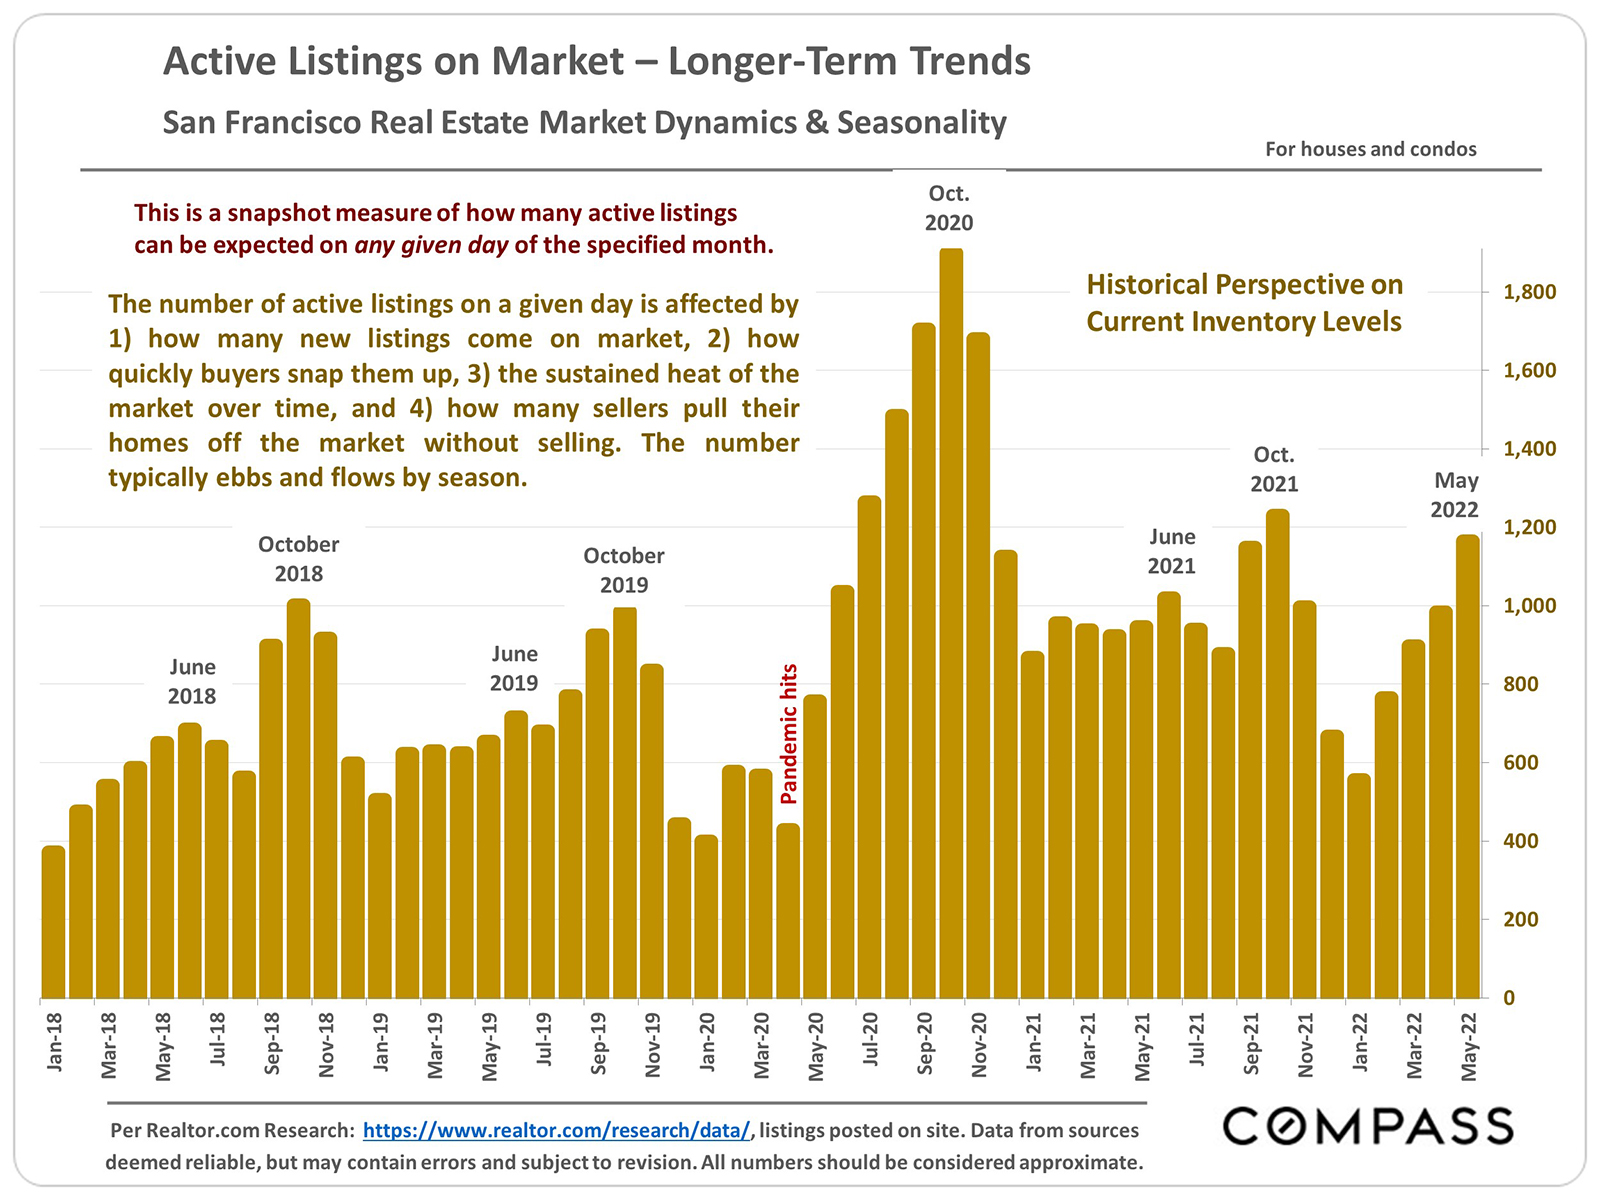 Active Listings on Market Longer Terms Trends